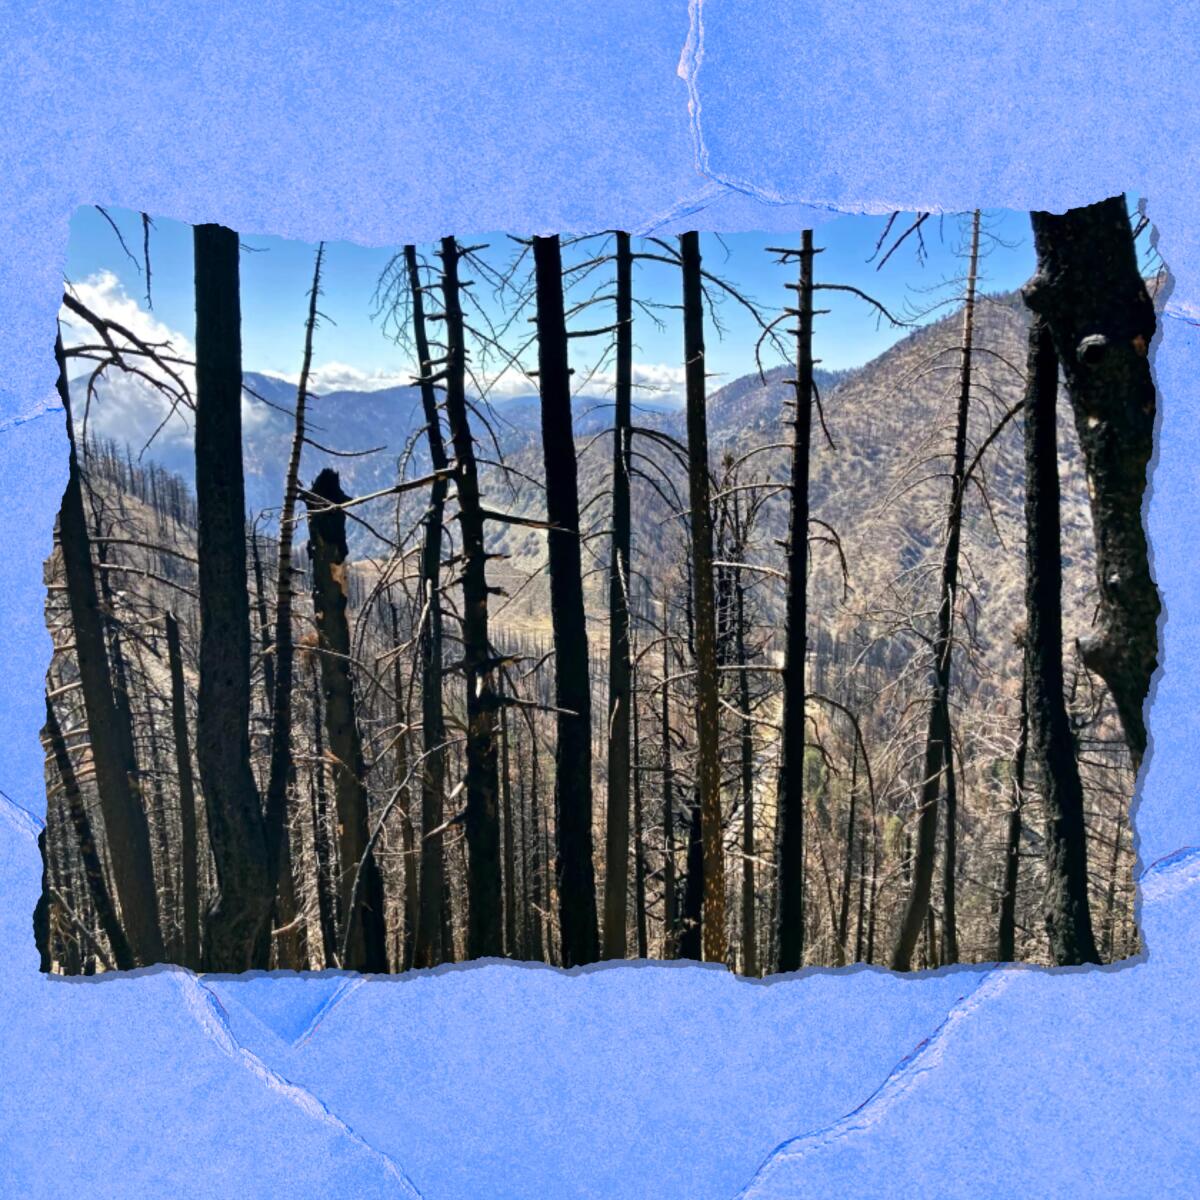 Closeup of blackened trees. In the background are mountains and blue sky.